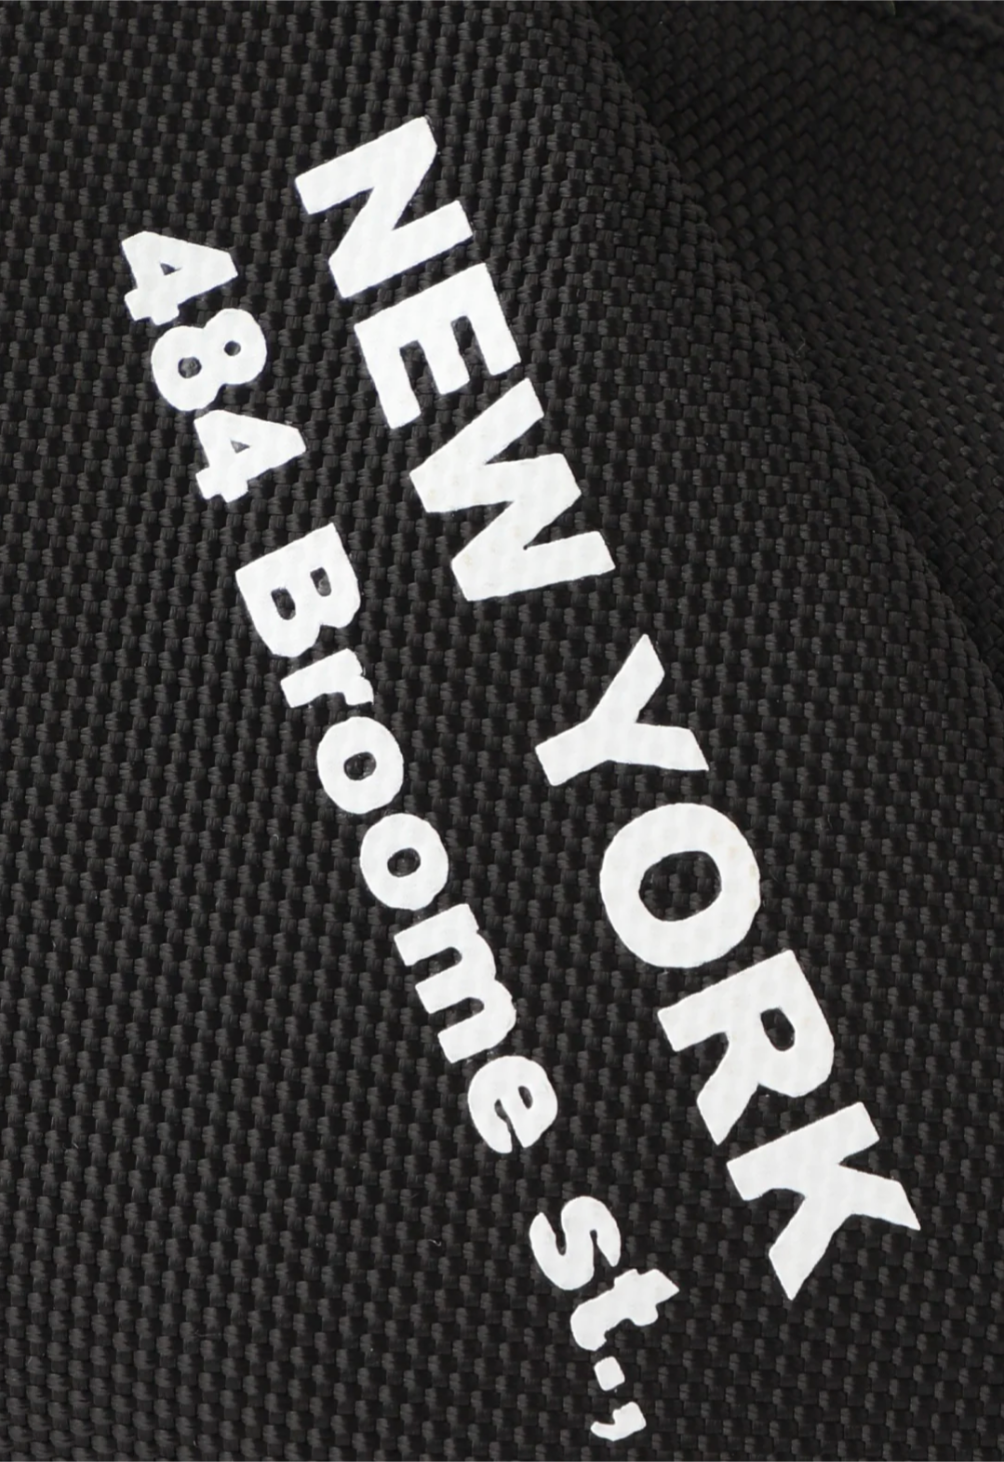 The Anyone Fanny Pack, detail on bottom of “NY 484 Broome sf.” In white fonts